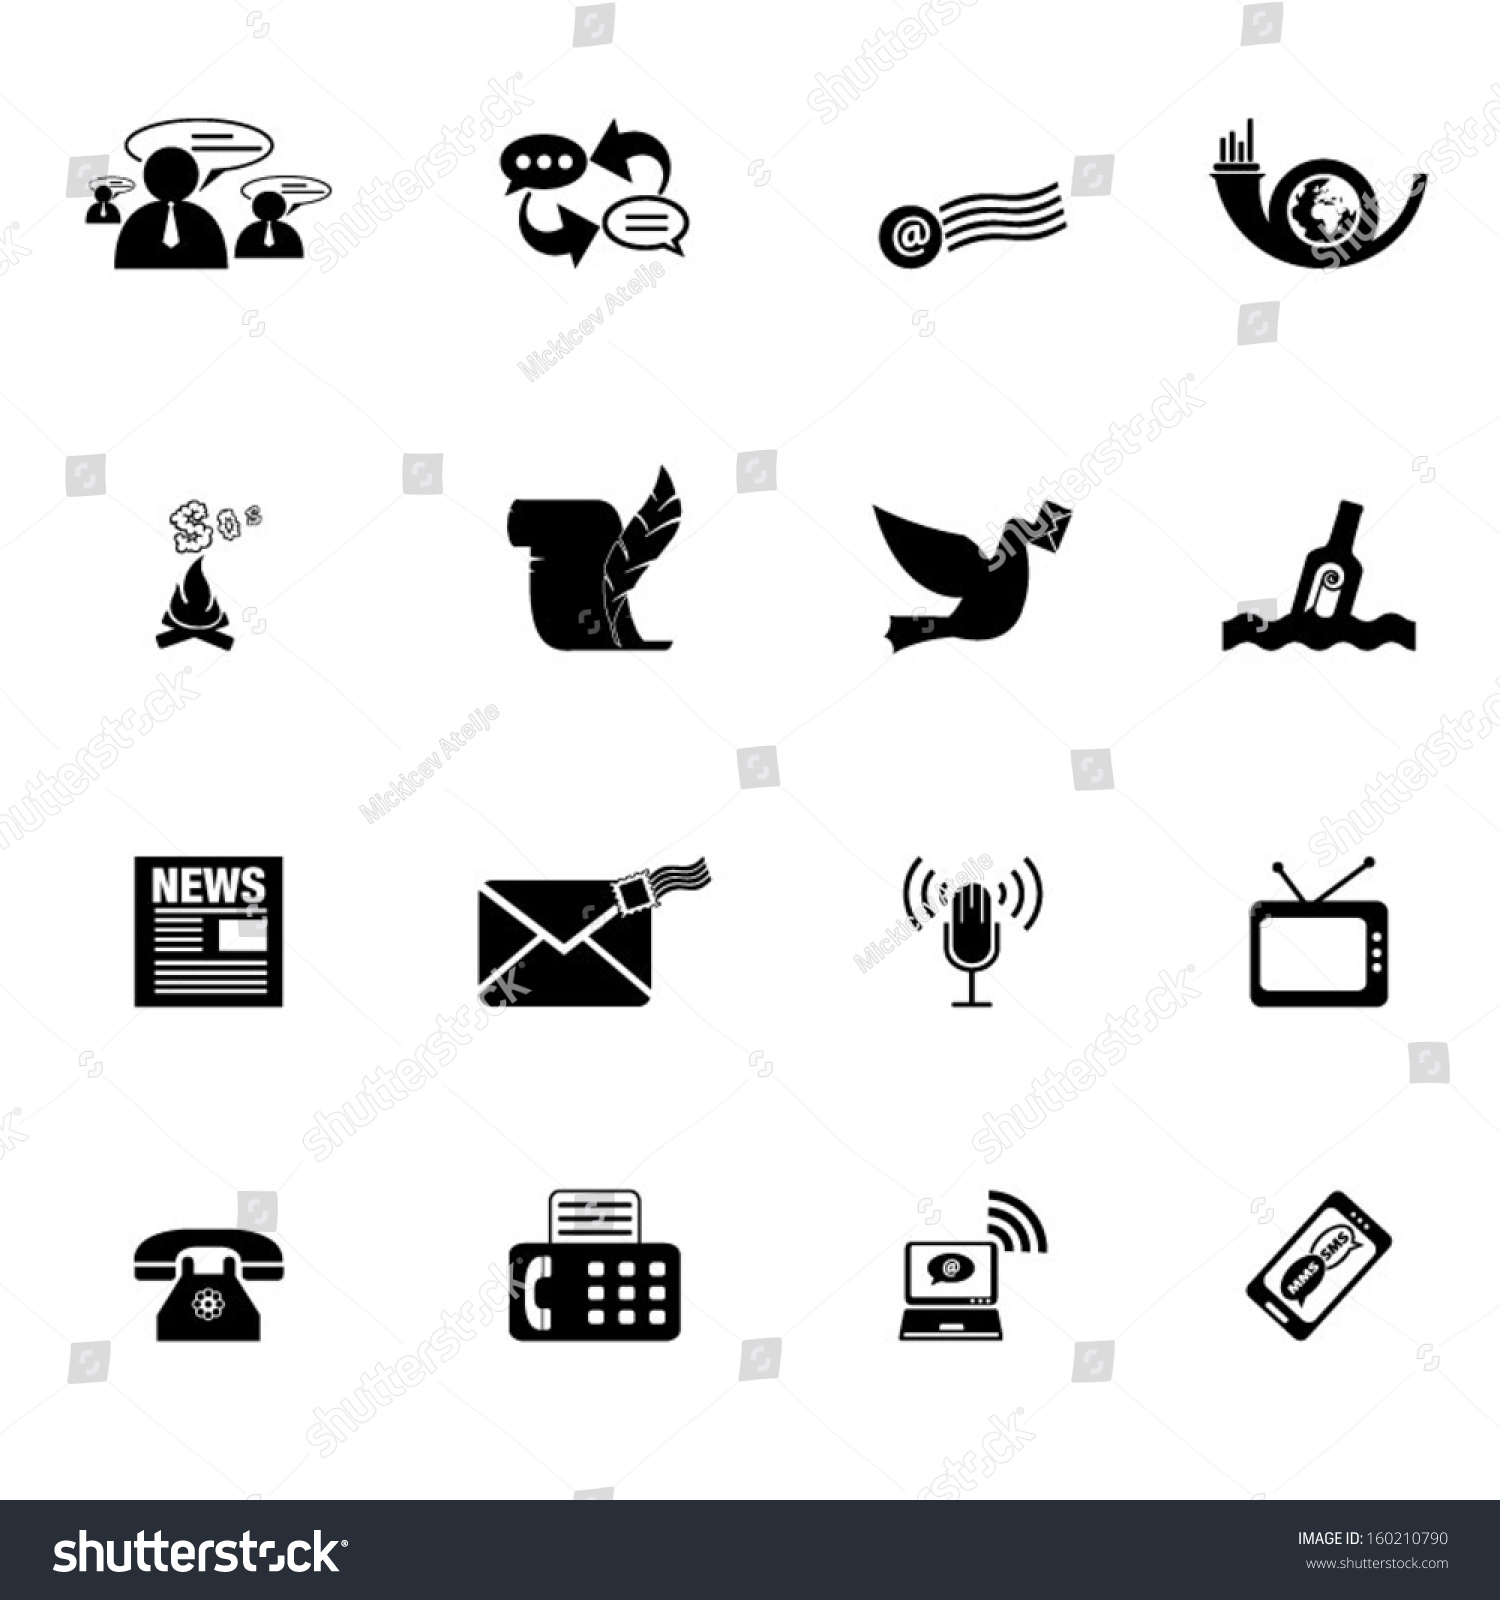 Communication Icons Illustration Royalty Free Stock Vector 160210790 